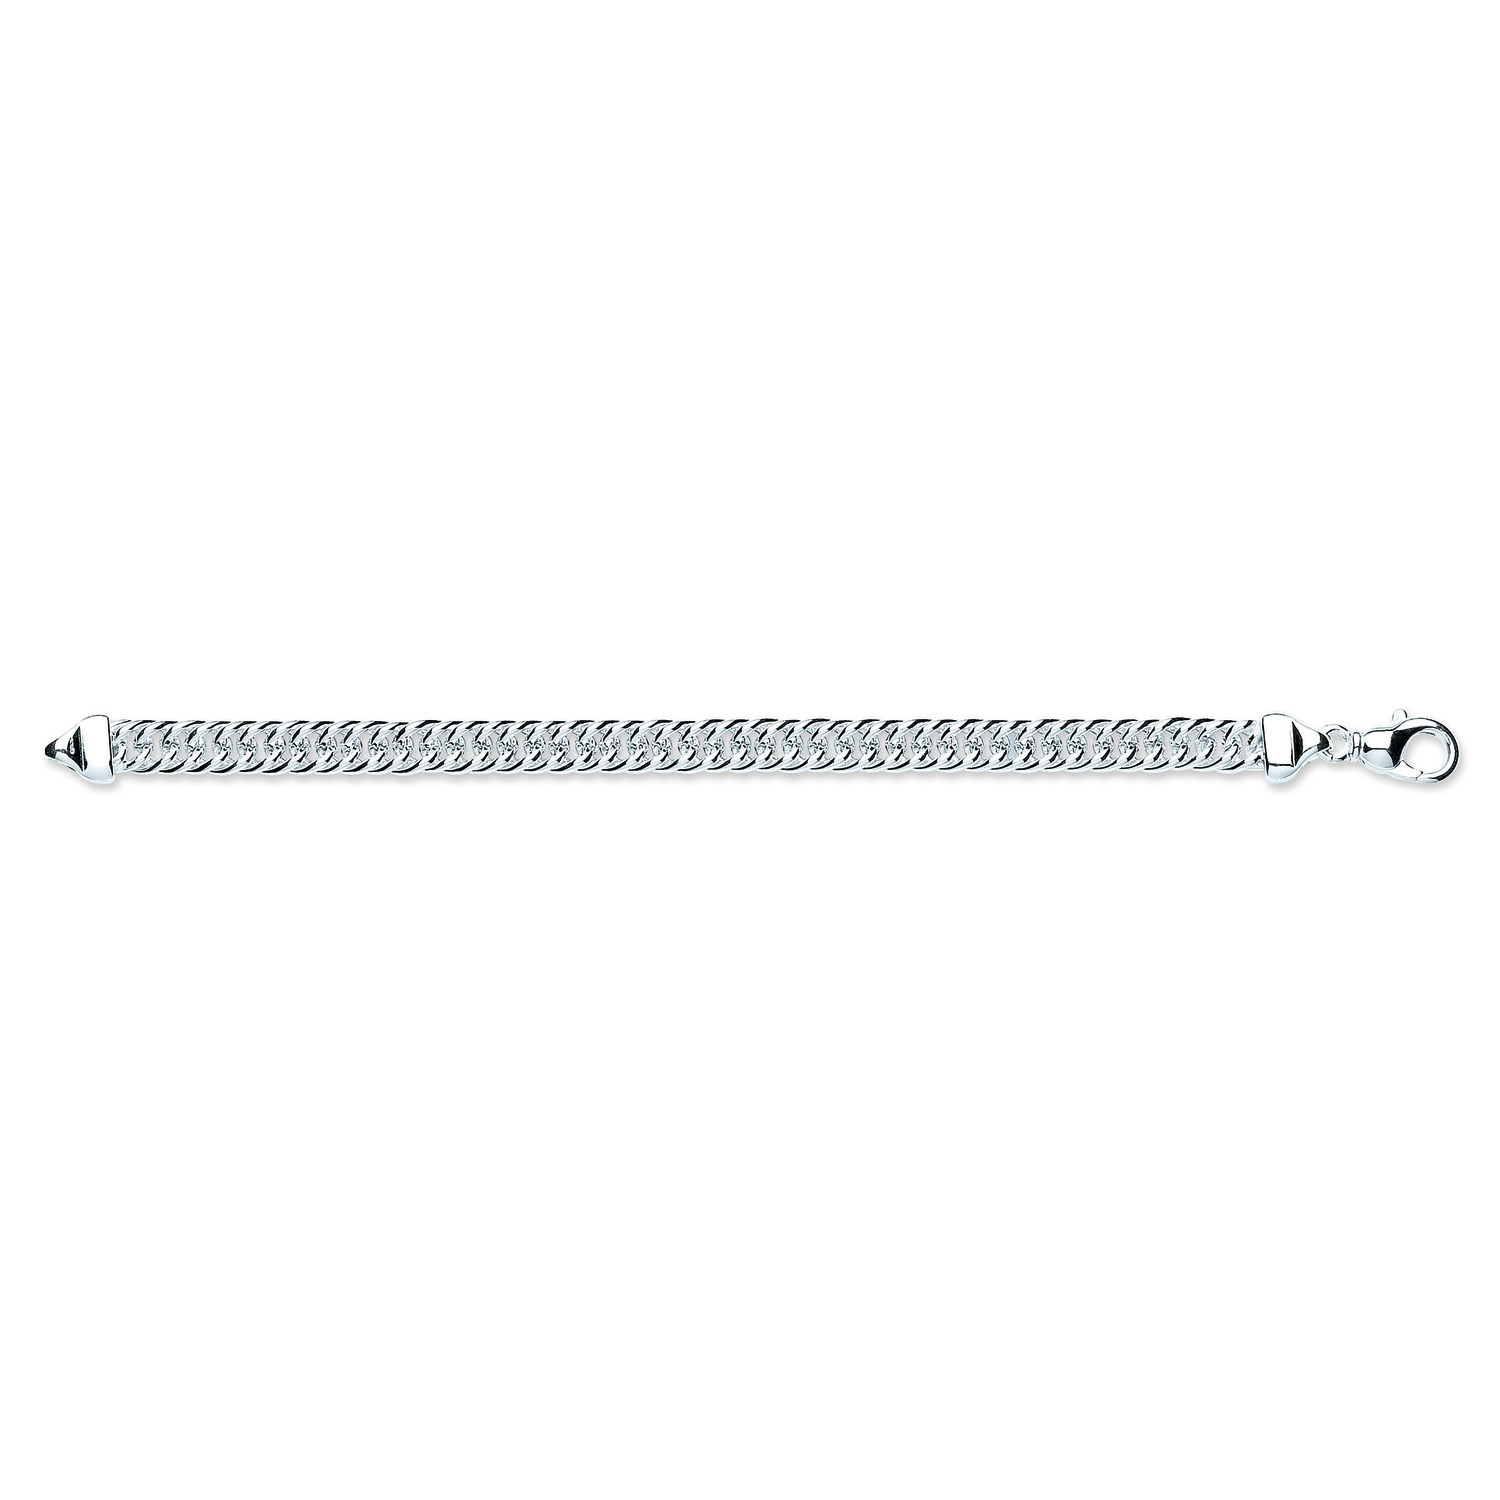 Silver Double Tight Link Curb Bracelet